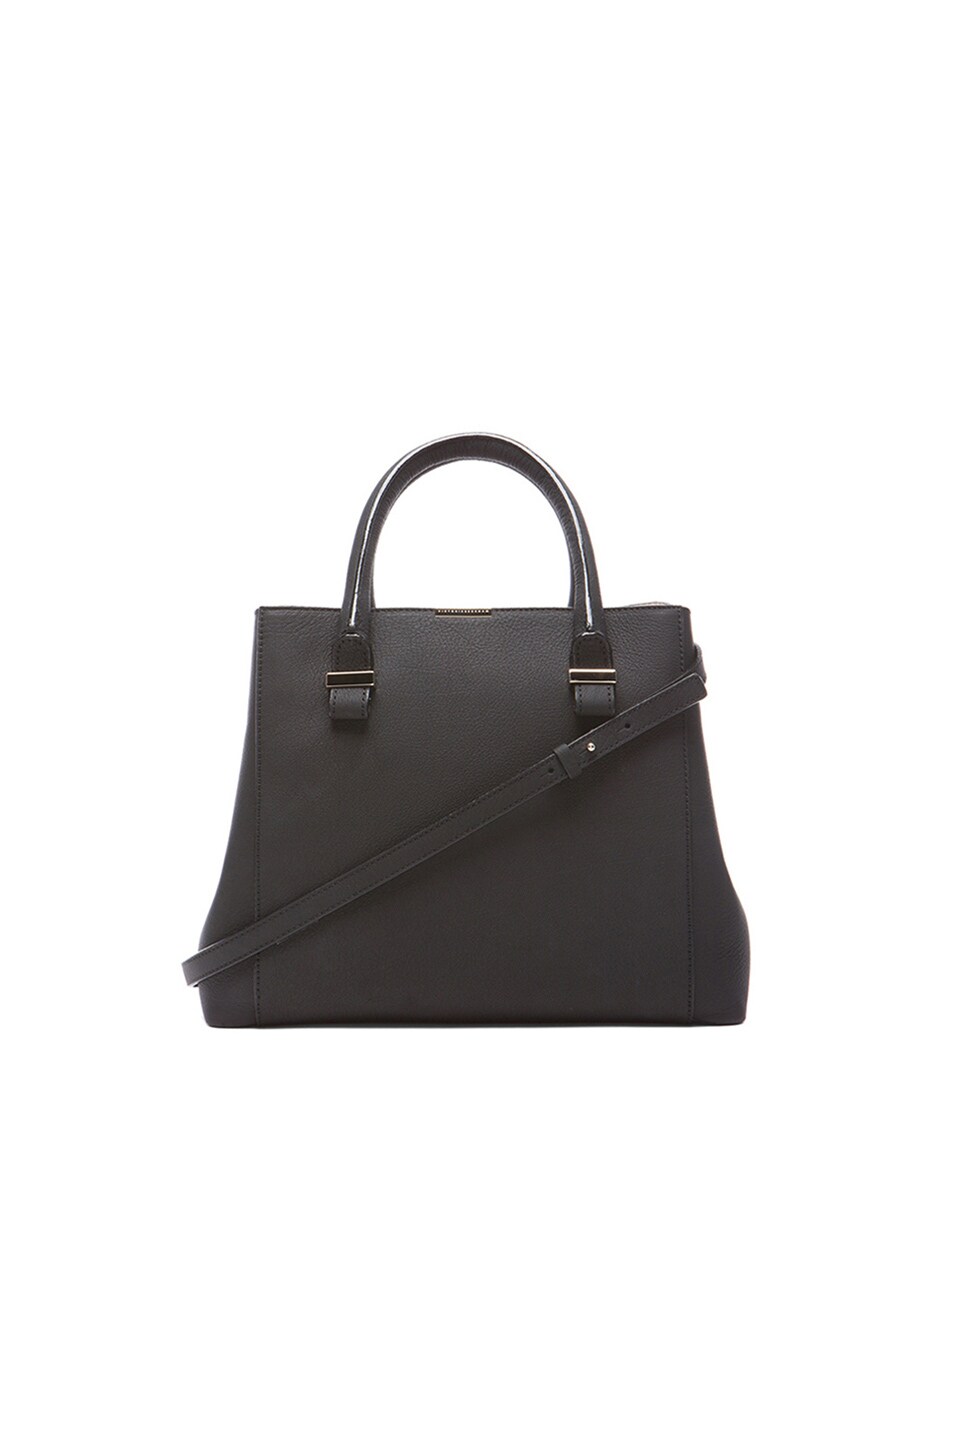 Image 1 of Victoria Beckham Quincy Tote in Black & Nude